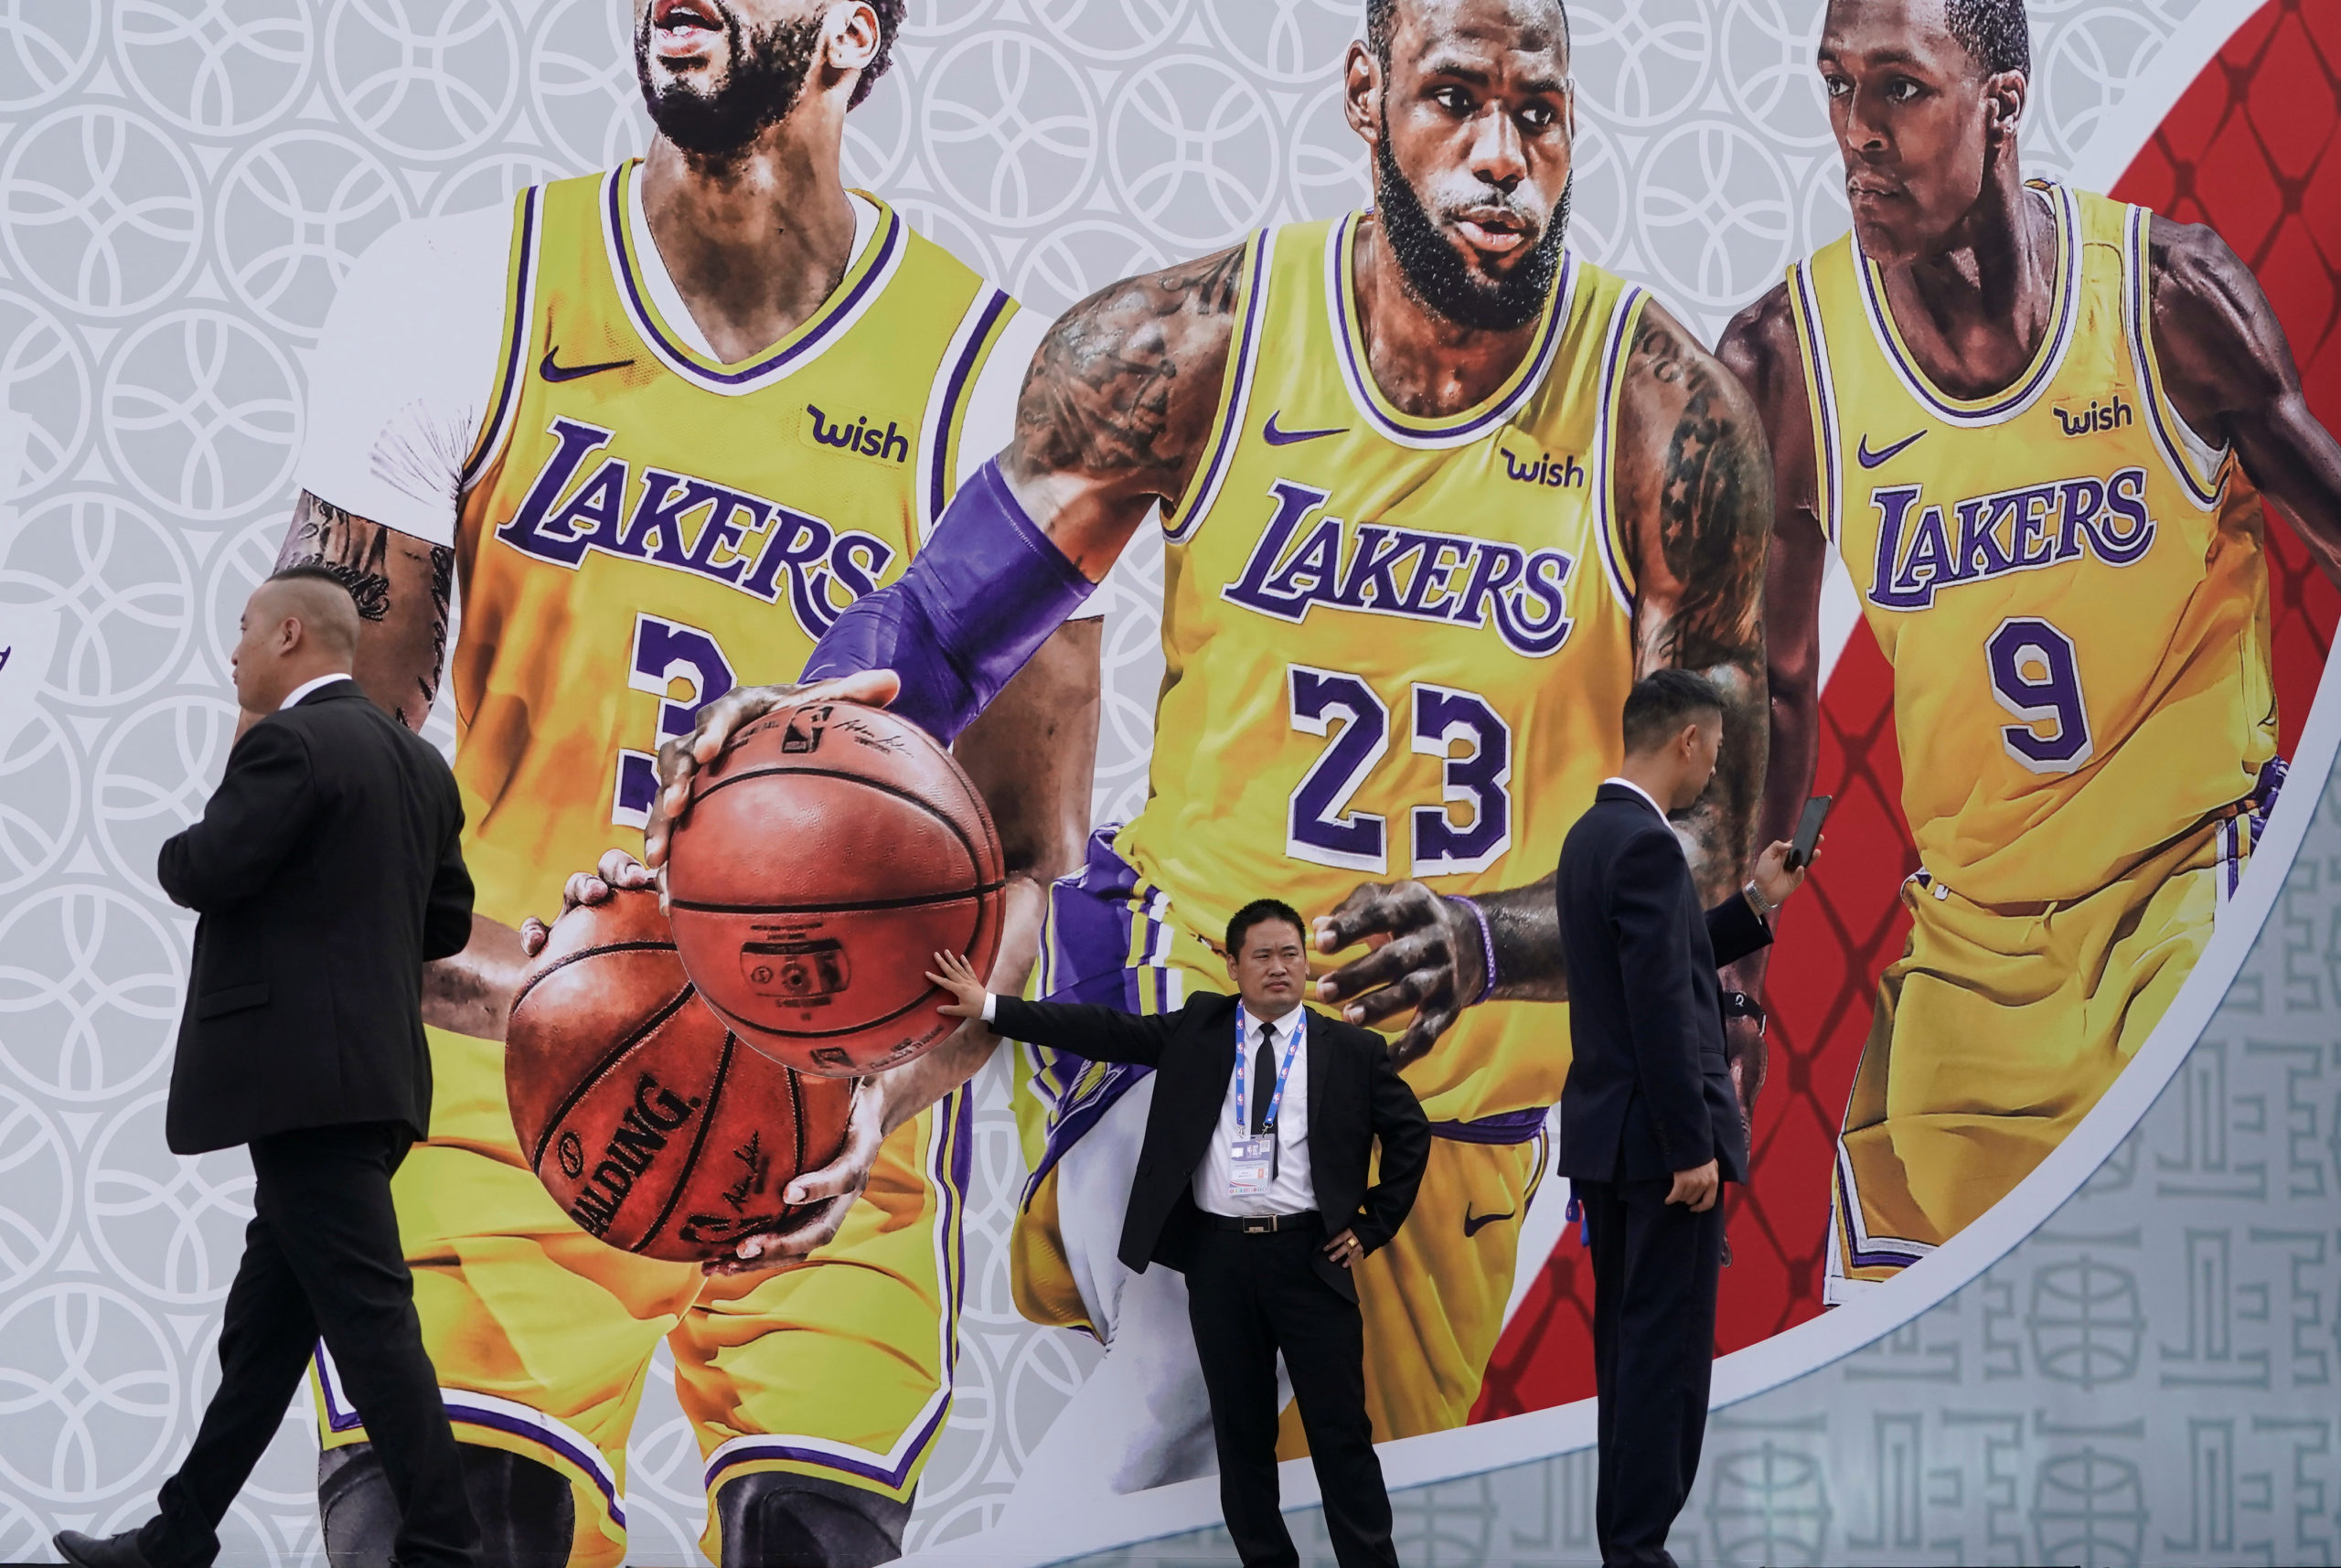 Security personnel stand in front of a billboard with an image of Los Angeles Lakers  basketball players outside the venue that was scheduled to hold fan events ahead of an NBA China game between Brooklyn Nets and Los Angeles Lakers, at the Oriental Sports Center in Shanghai, China October 9, 2019.